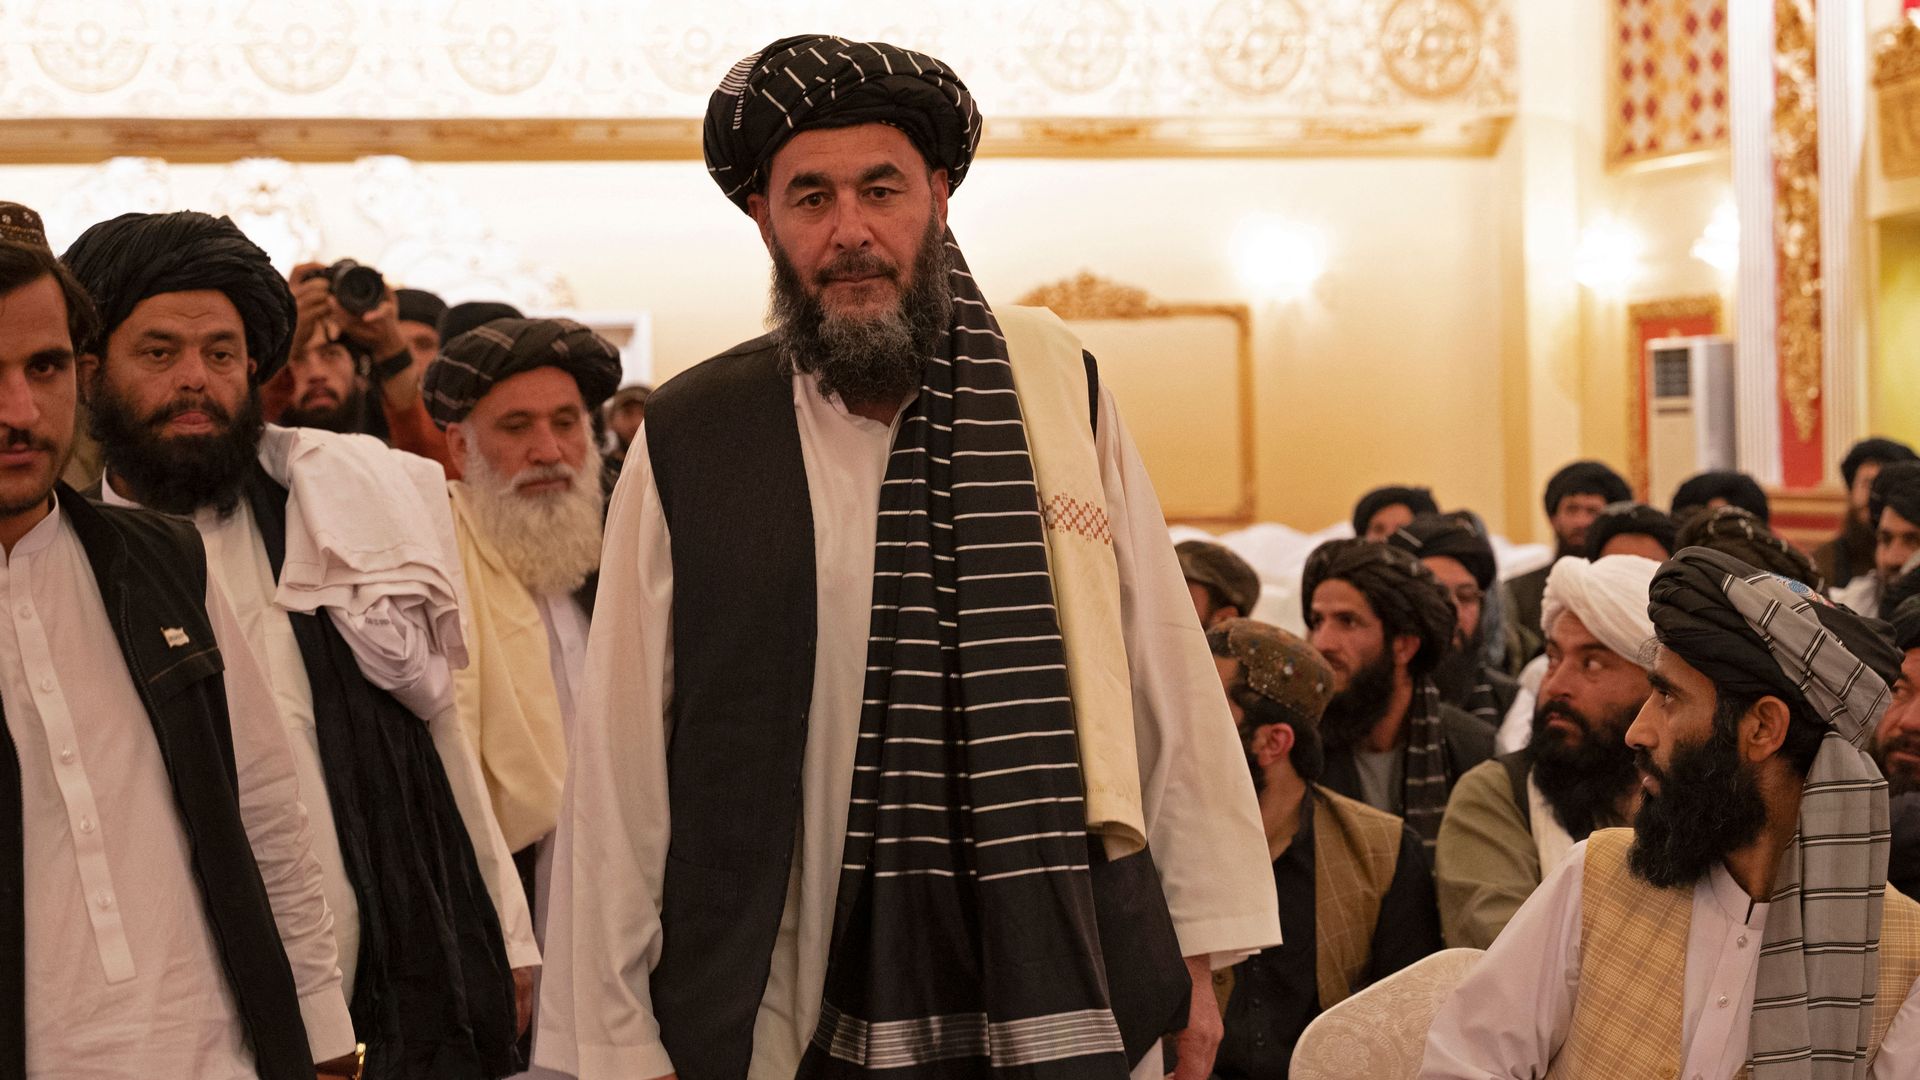 Bashar Noorzai (C), a warlord and Taliban associate attends press event at the Intercontinental Hotel in Kabul on September 19, 2022.